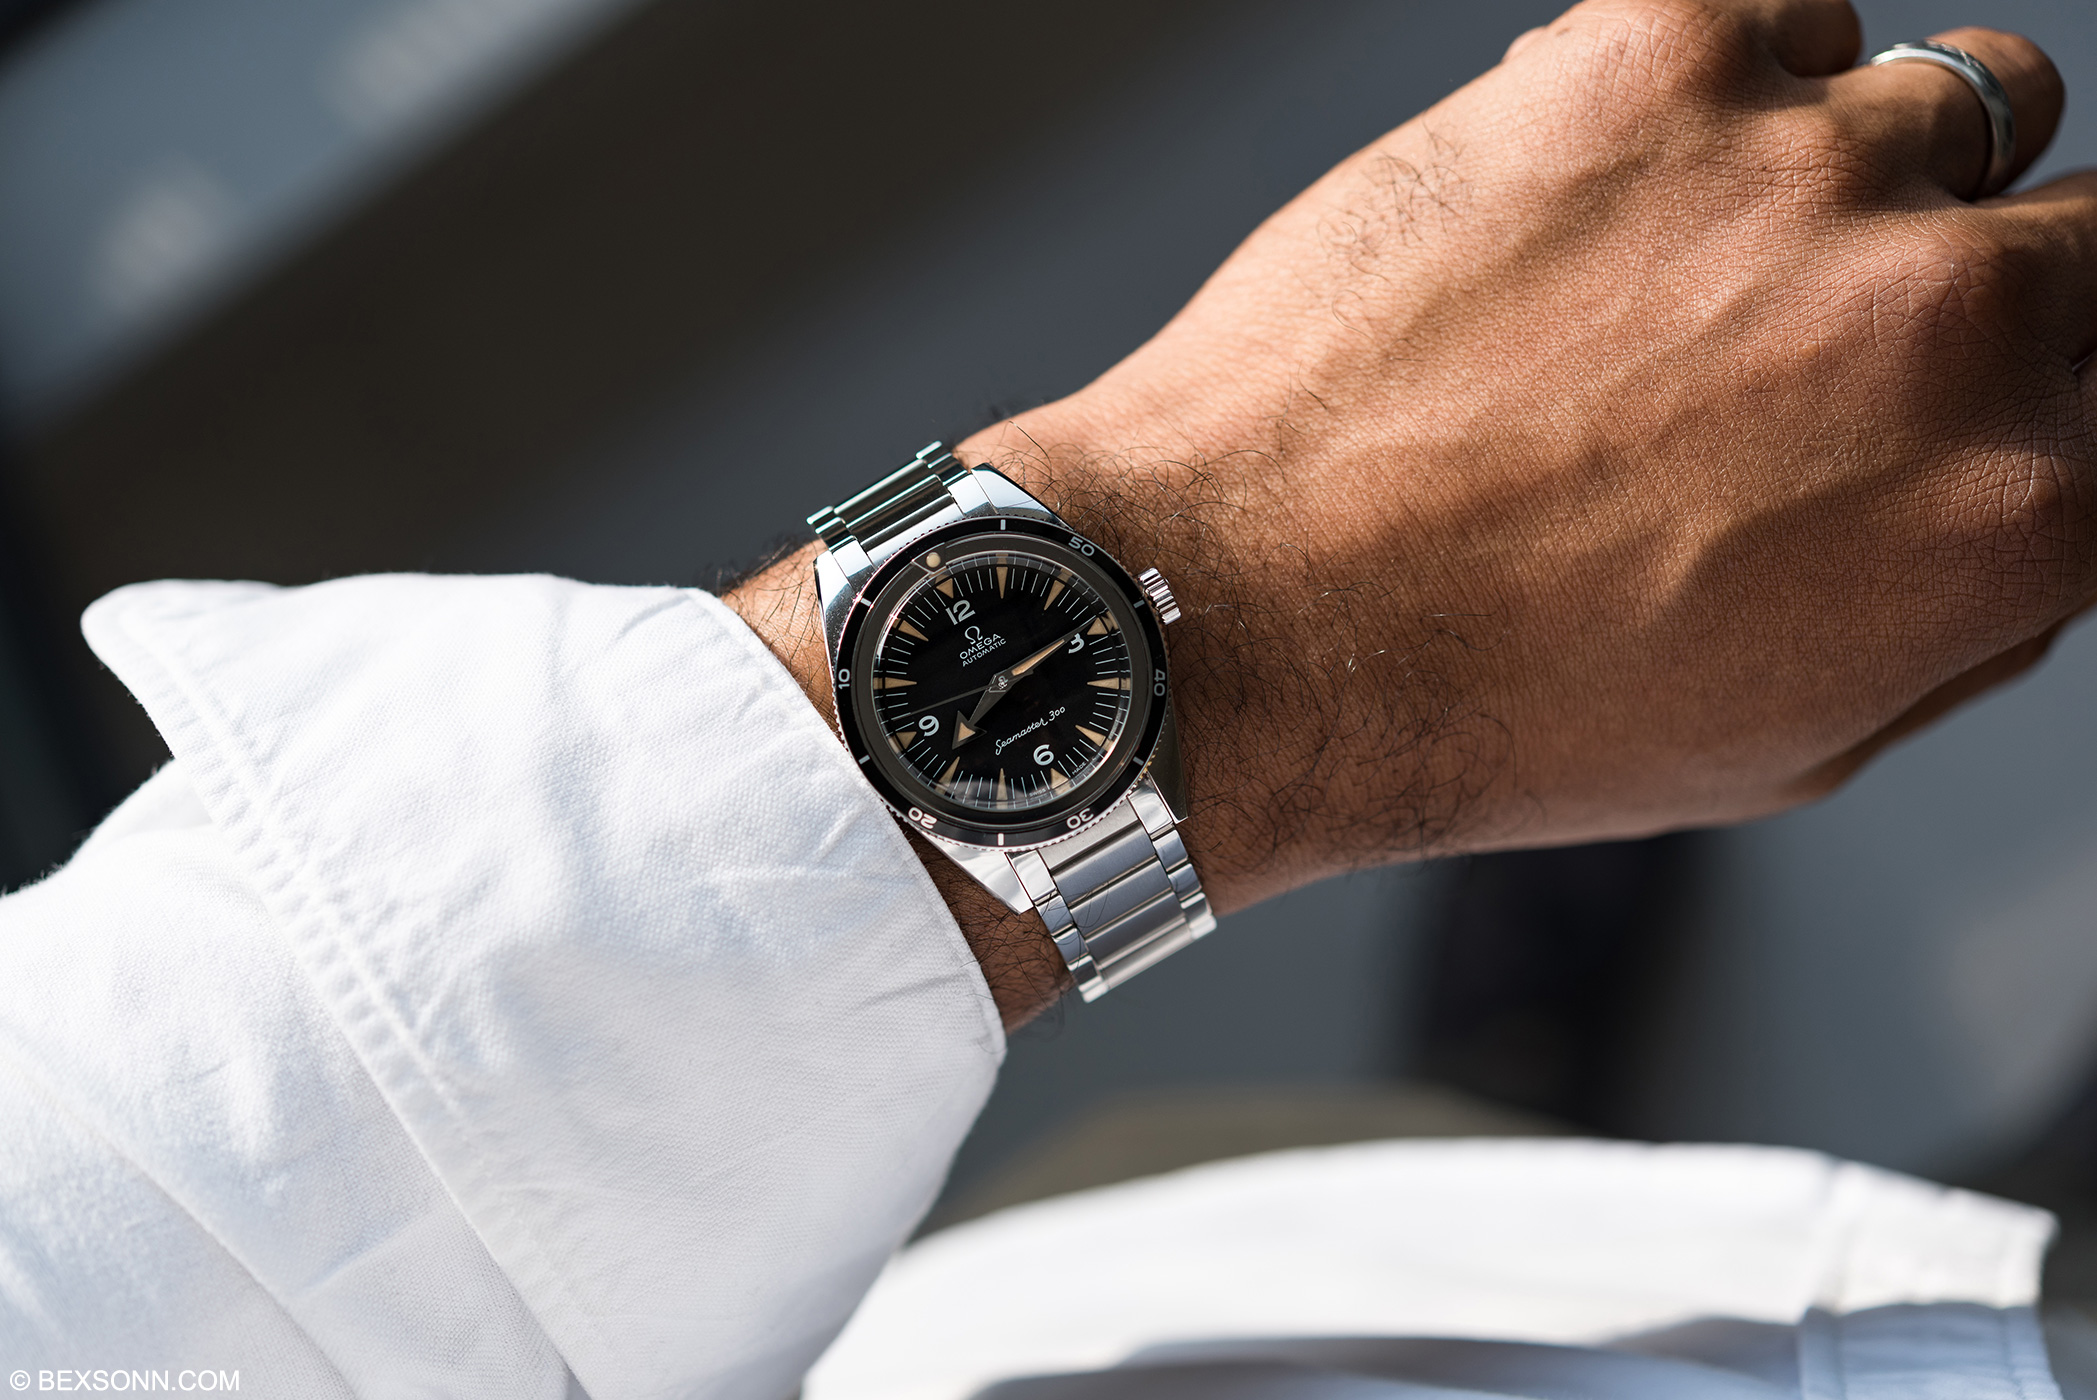 The Omega Seamaster 300: The Coveted 